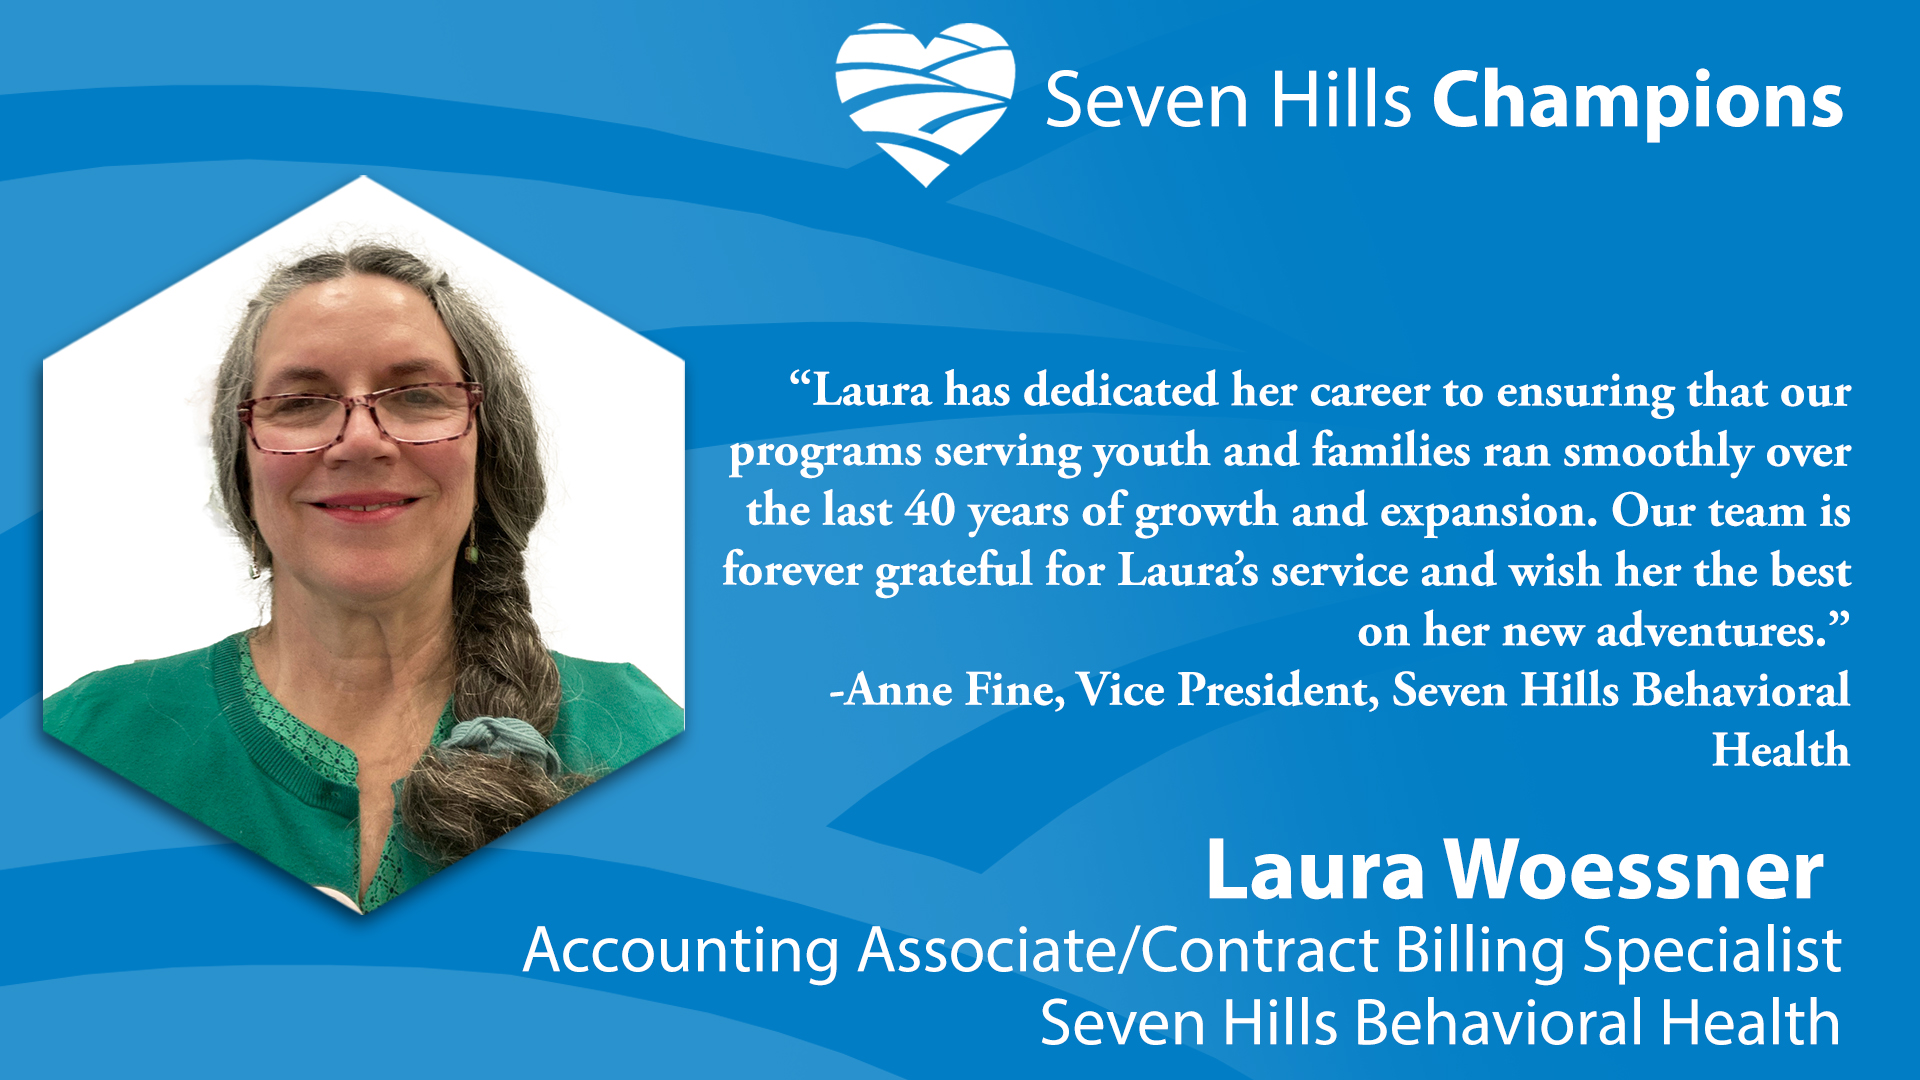 Join Us in Congratulating Laura Woessner on a 40+ Year Career!